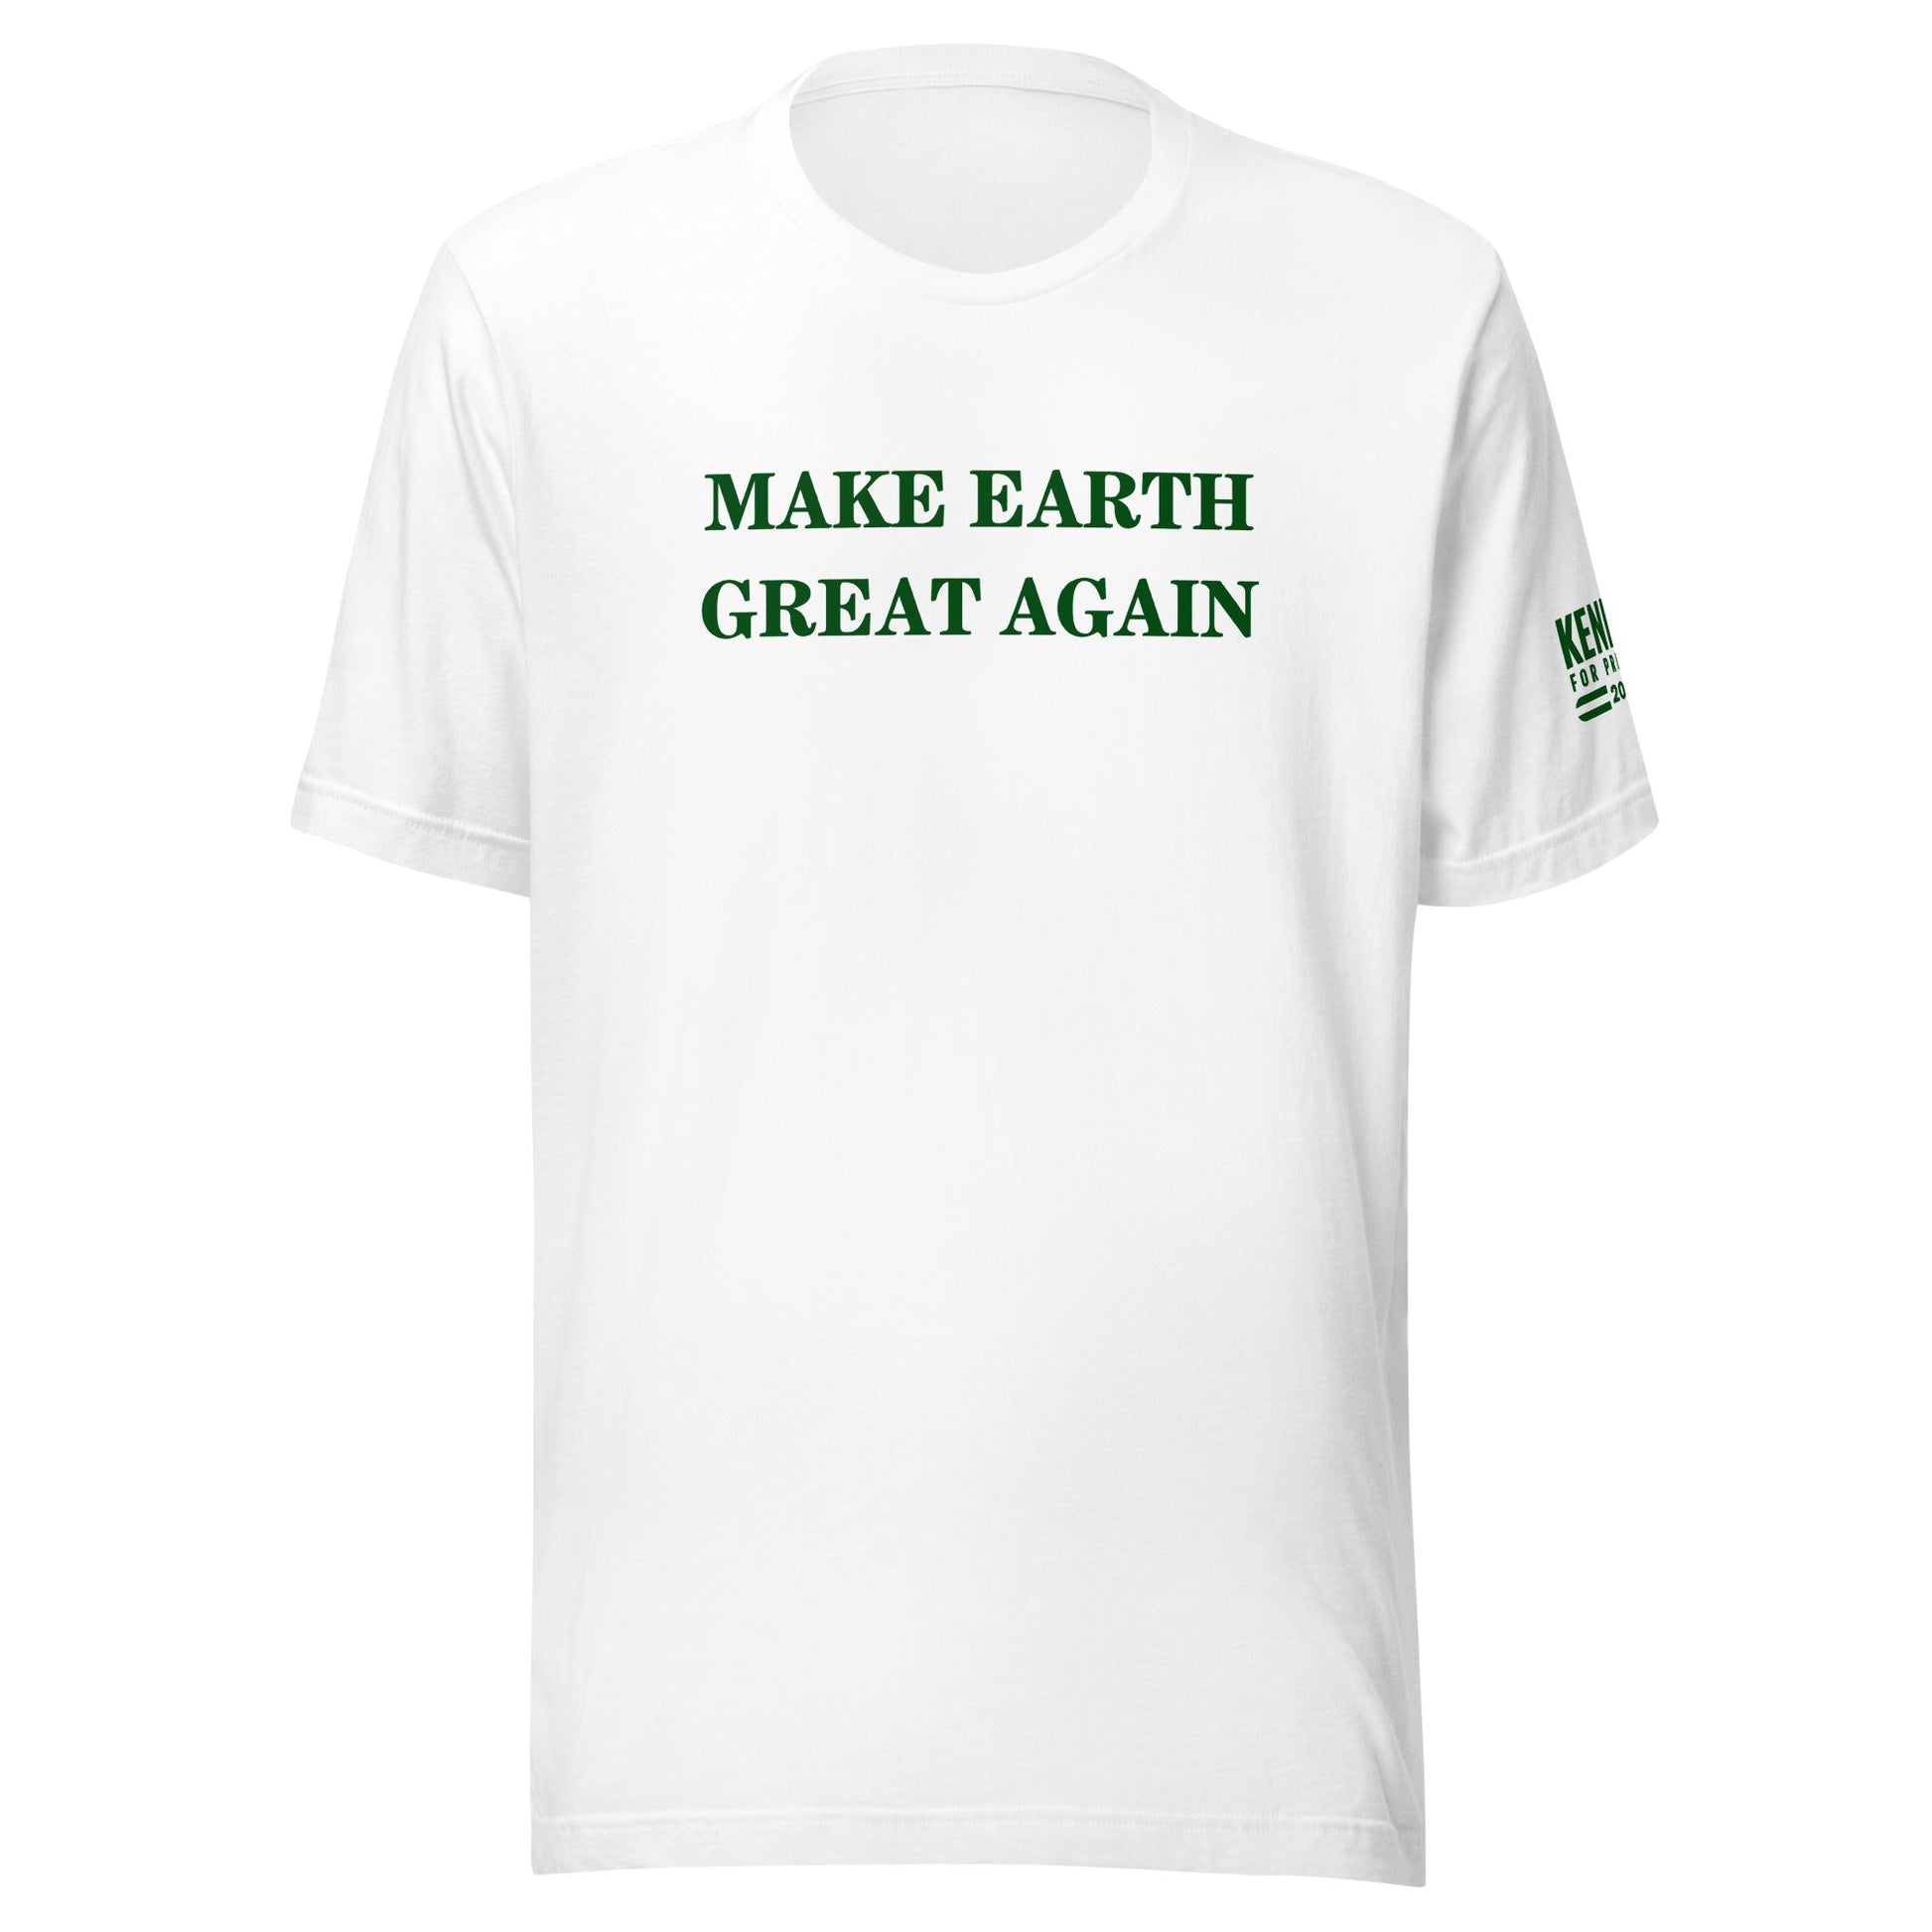 Make Earth Great Again Unisex Tee - TEAM KENNEDY. All rights reserved